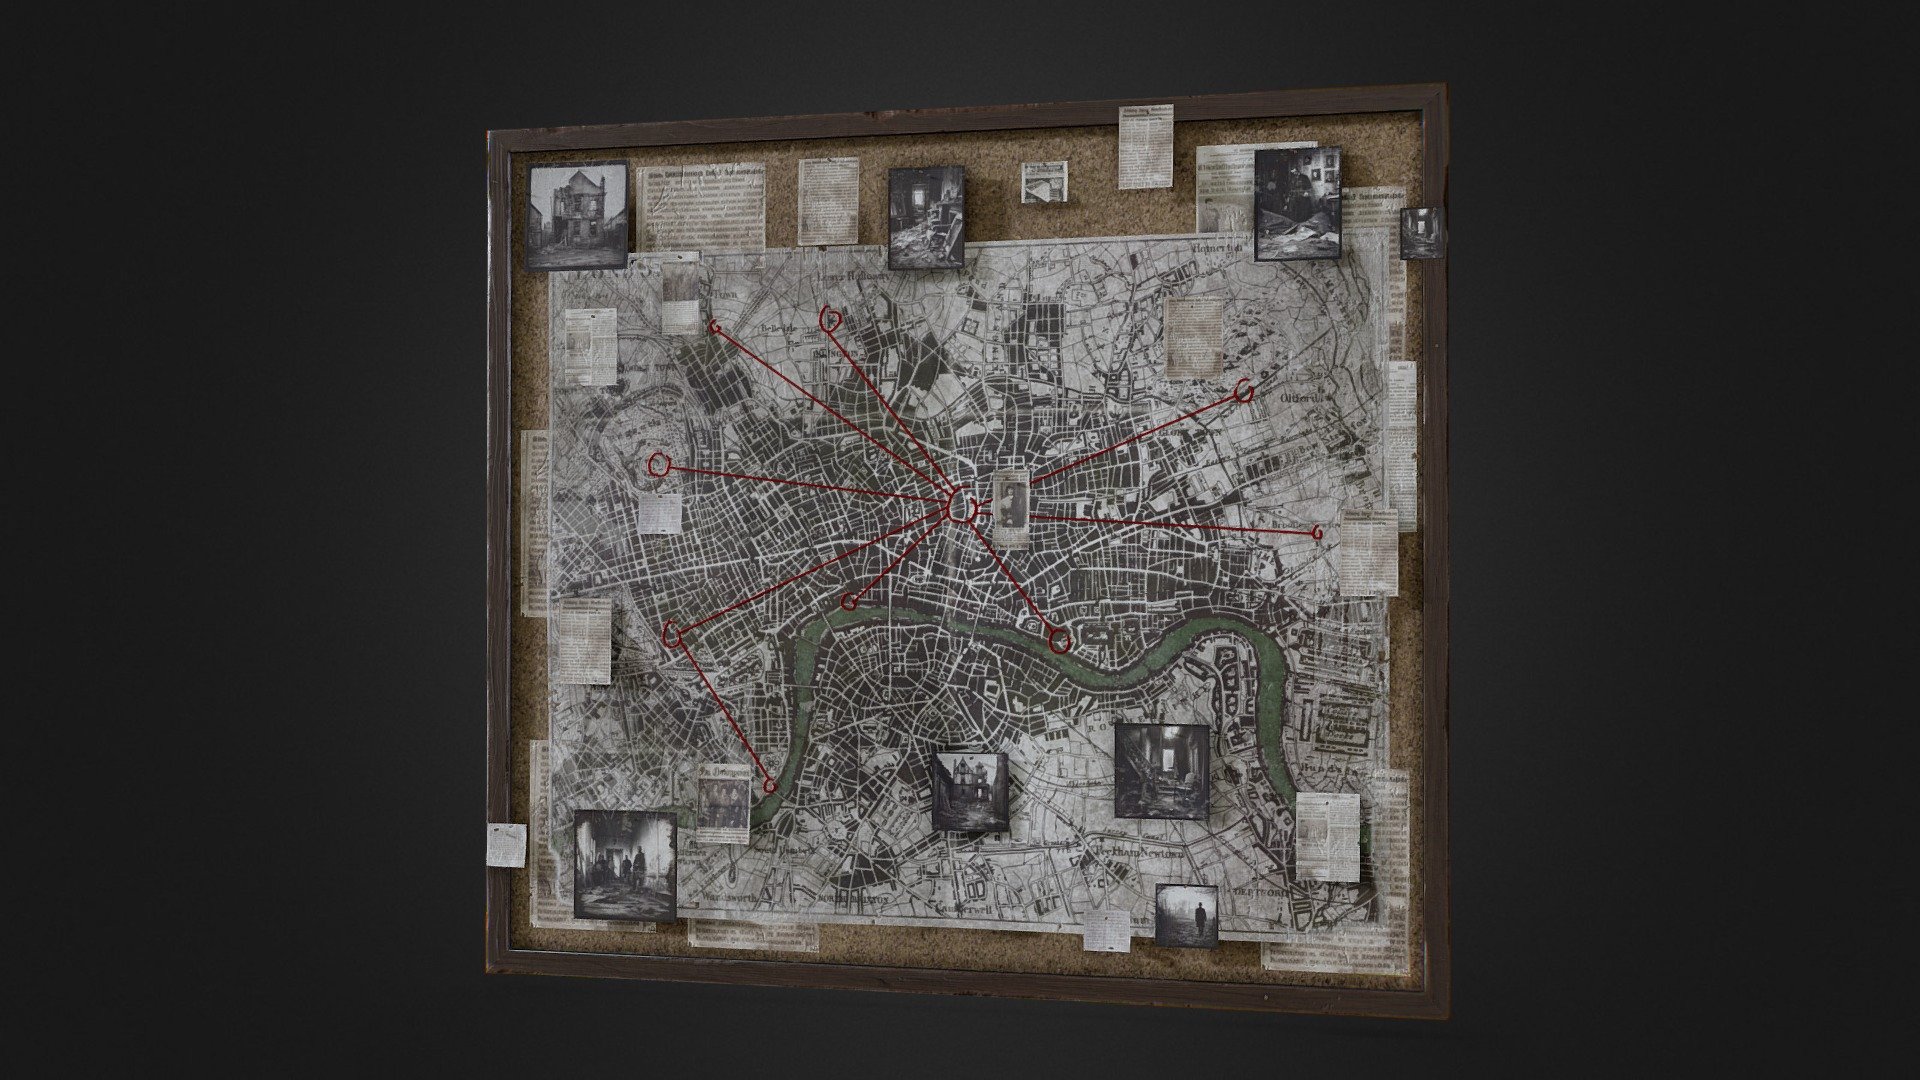 This game-ready model features a Victorian inspired detective board. This model is included in Victorian Room on Sketchfab.

Features




The mode includes an investigation pinboard for a detective or police themed environment

The model is low-poly and optimised for use in game, VR, archviz, and visual production.

The model has clean topology, grouped and named appropriately, and unwrapped.

1,638 triangles; 1,246 vertices.

Modelled in Blender and textured in Substance Painter.

Textures

Model has 1 PBR texture set. Textures are in .png at 4096x4096 and includes: Base Colour, Roughness, Metallic, Normal, Opacity - Detective Board - Buy Royalty Free 3D model by Matthew Collings (@mtcollings) 3d model